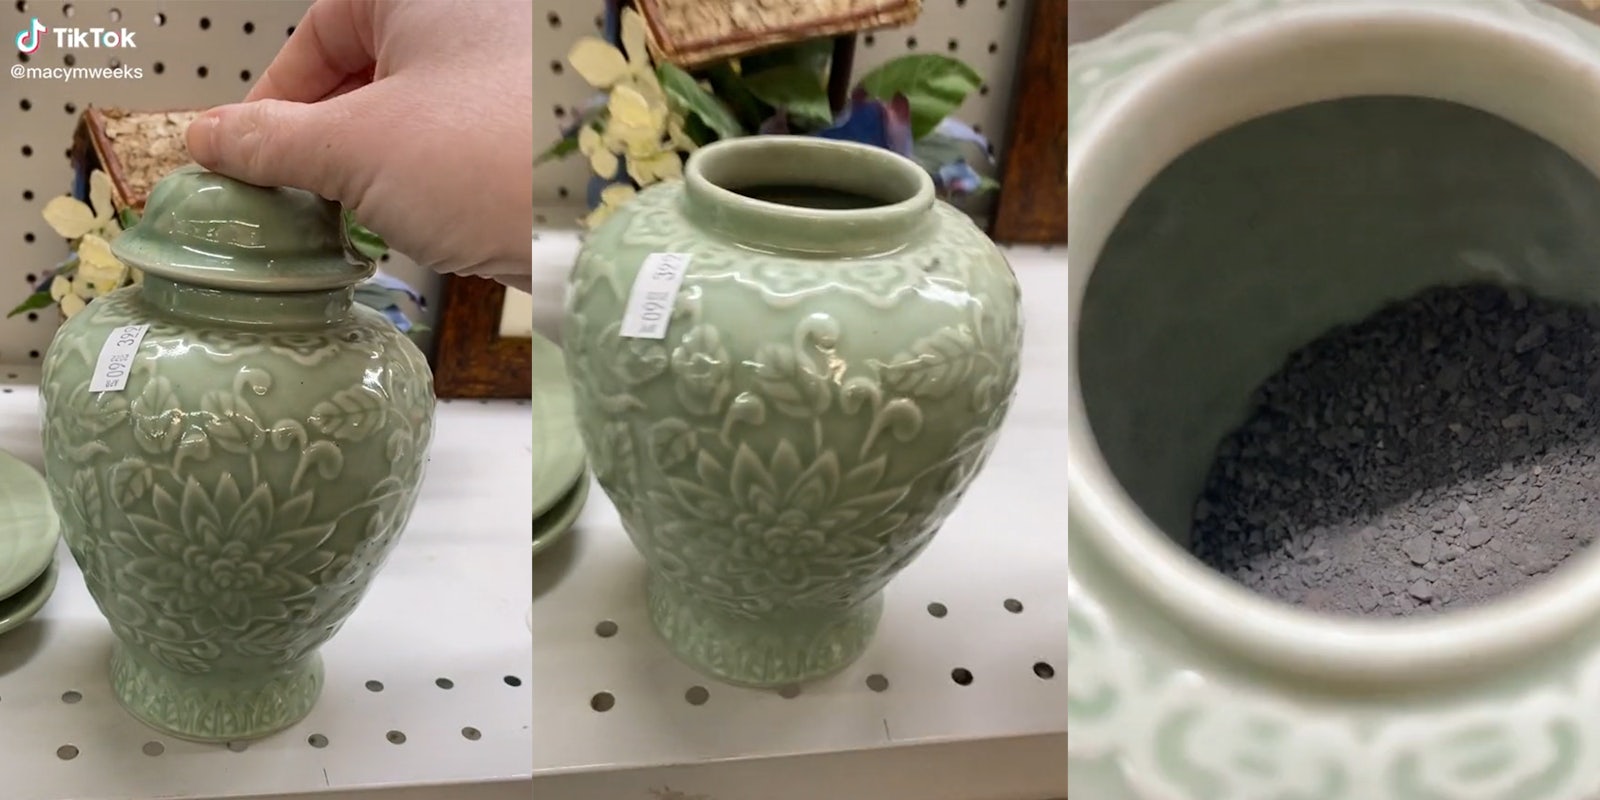 person opening urn on thrift store shelf to reveal ashes within